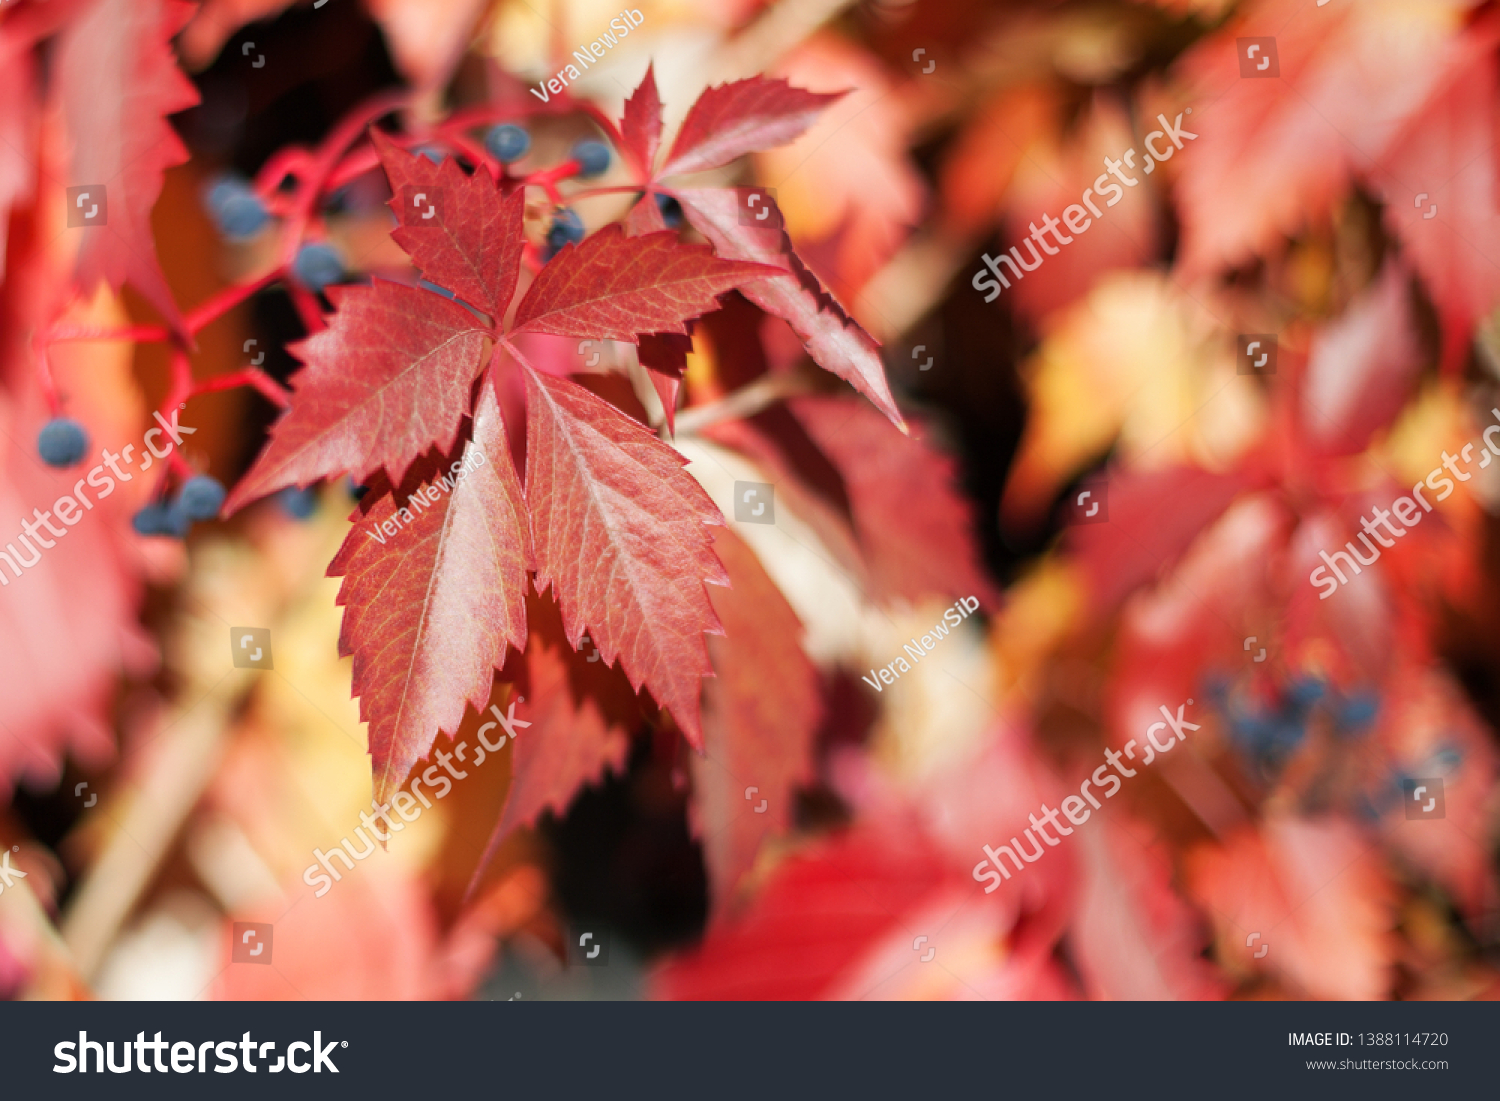 Red girlish grape leaves on blurred foliage background close up, autumn orange leaves pattern macro, warm fall sunny day nature image,  Parthenocissus, Virginia creeper climber plant, copy space #1388114720